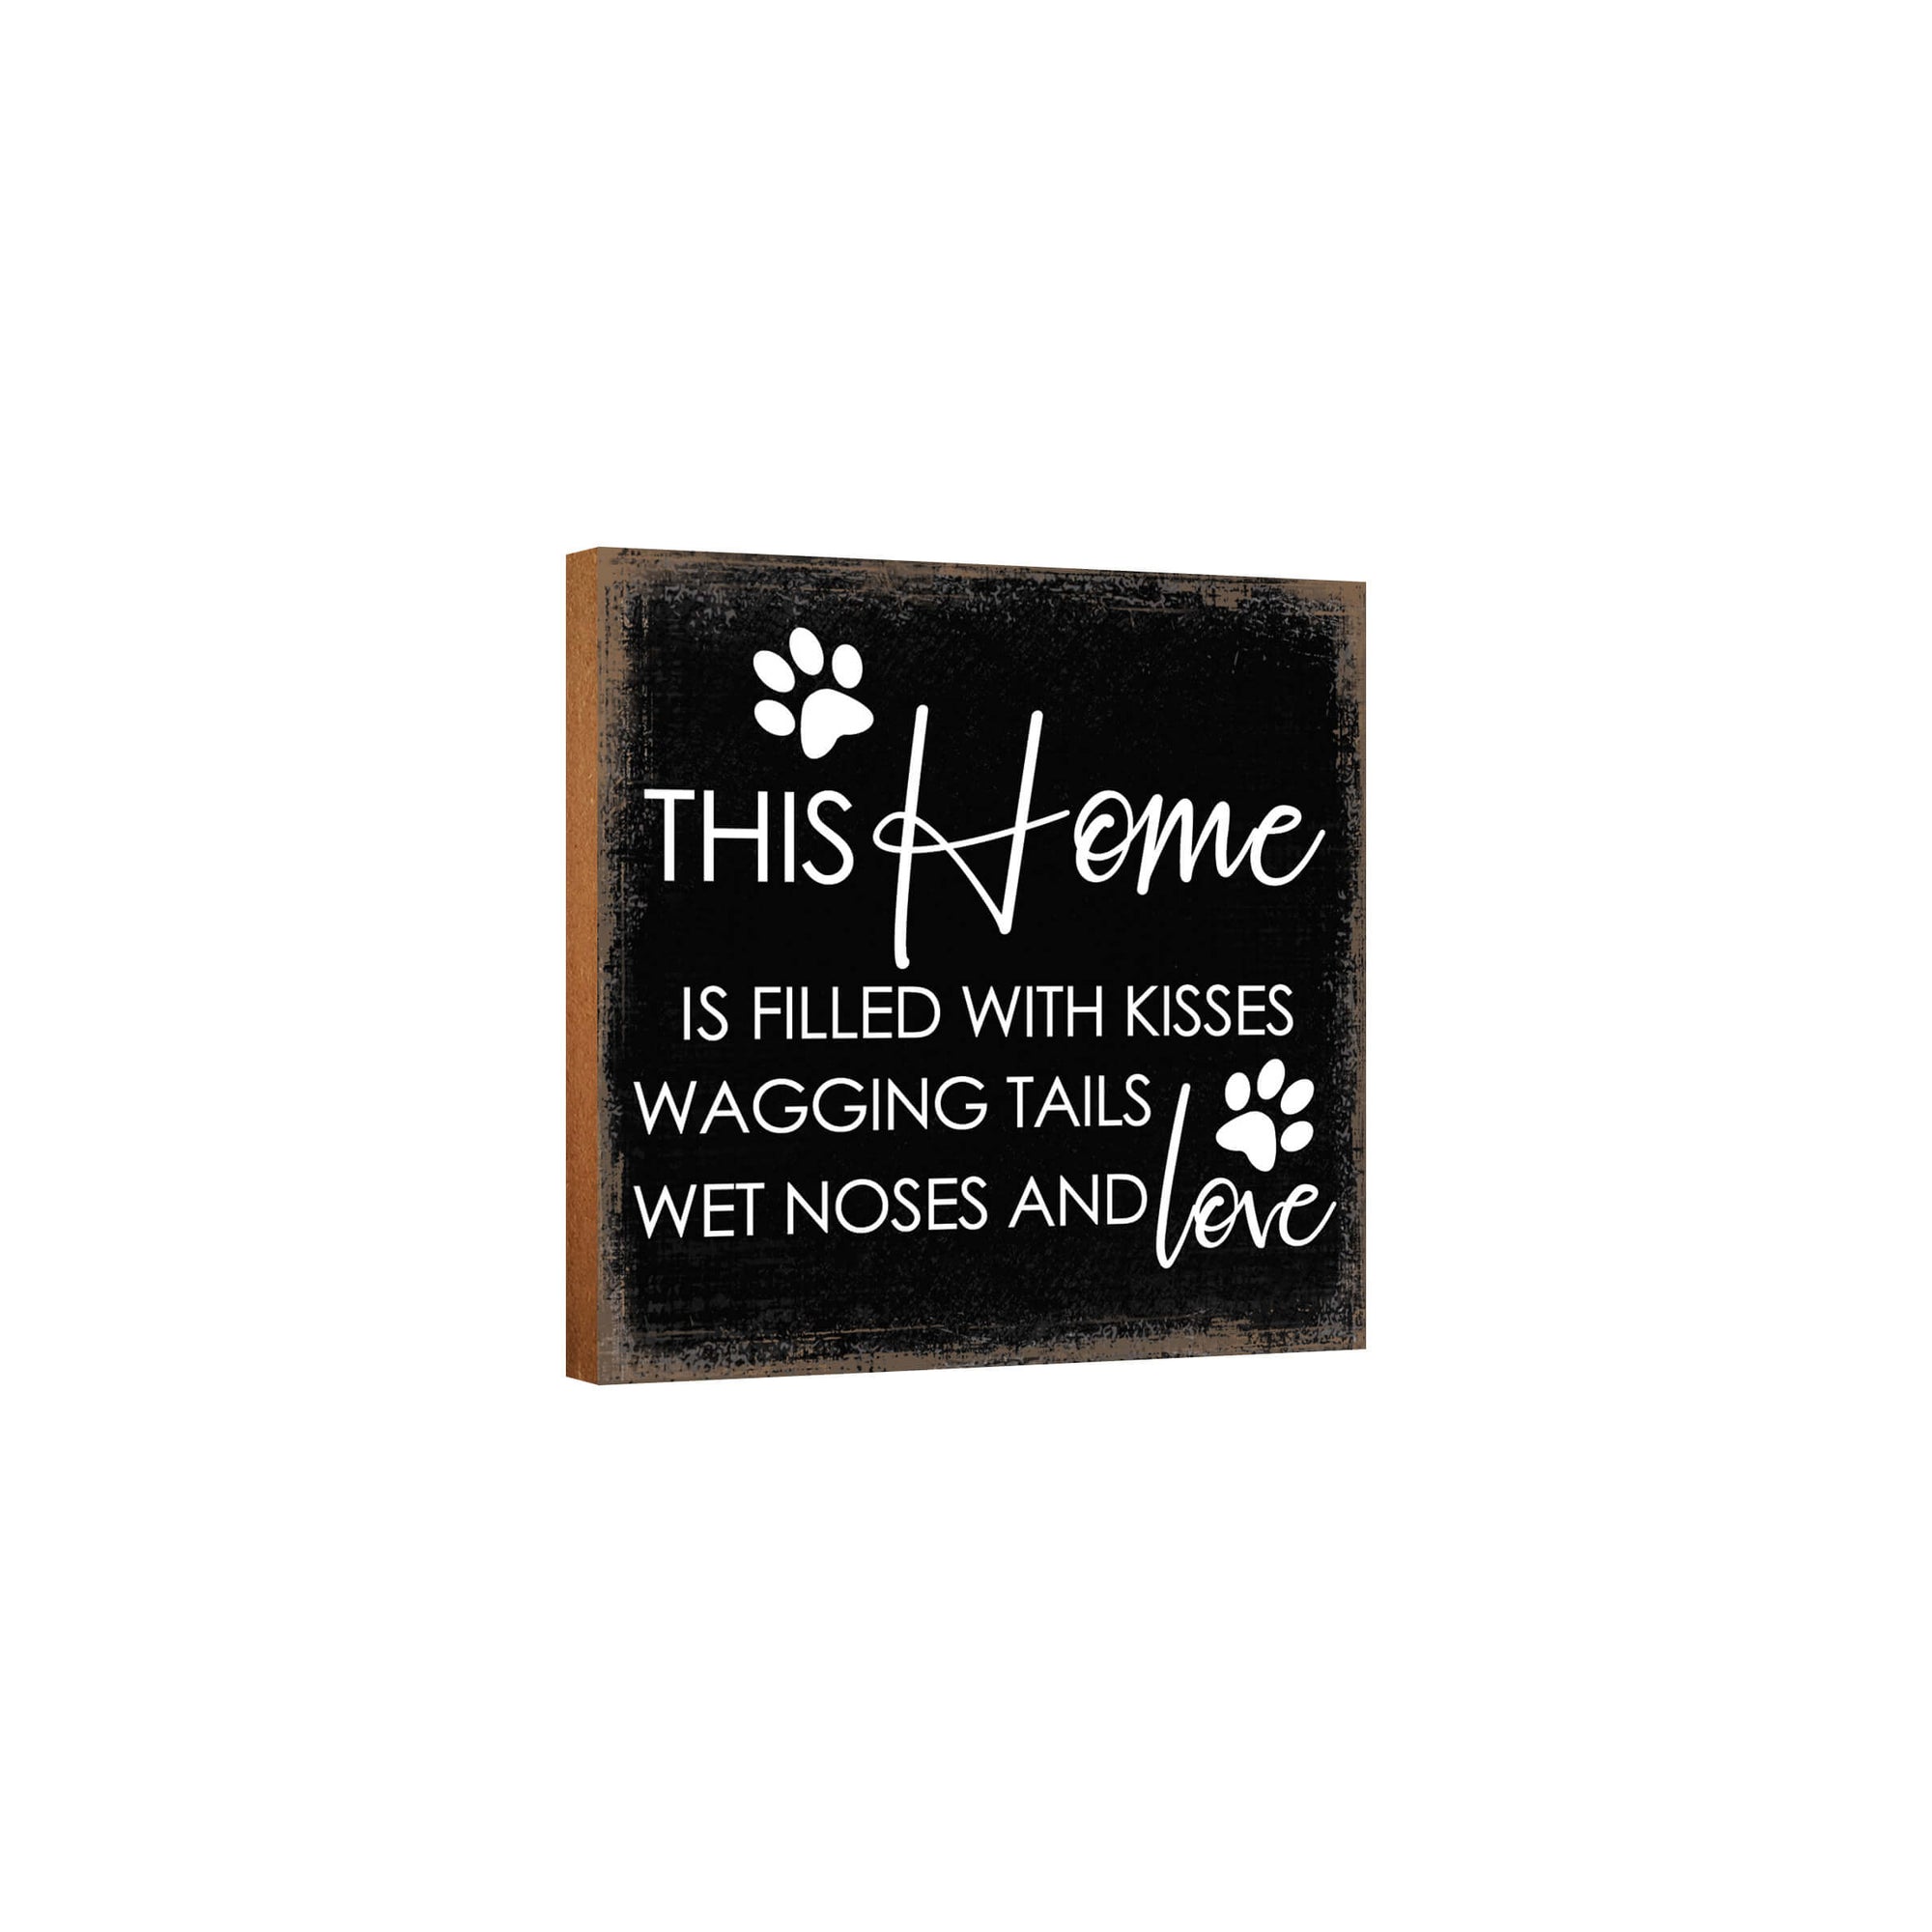 Wooden Shelf Decor and Tabletop Signs with Pet Verses - This Home Is Filled